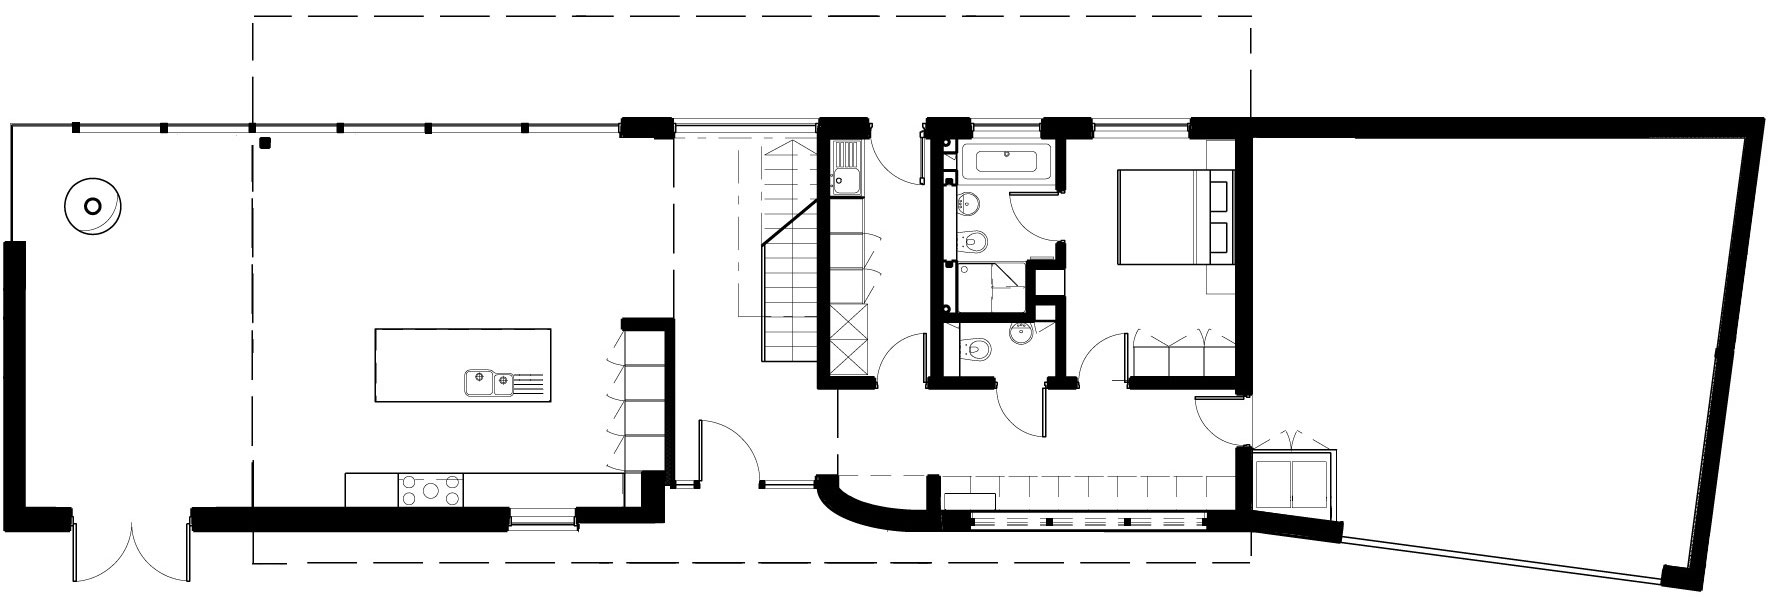 Floor Plan Meadowview First Floor Plan Family Rustic Meadowview House Design Ideas By Platform 5 Architects Architecture Captivating Rustic Family Home Designed For A Retired Couple